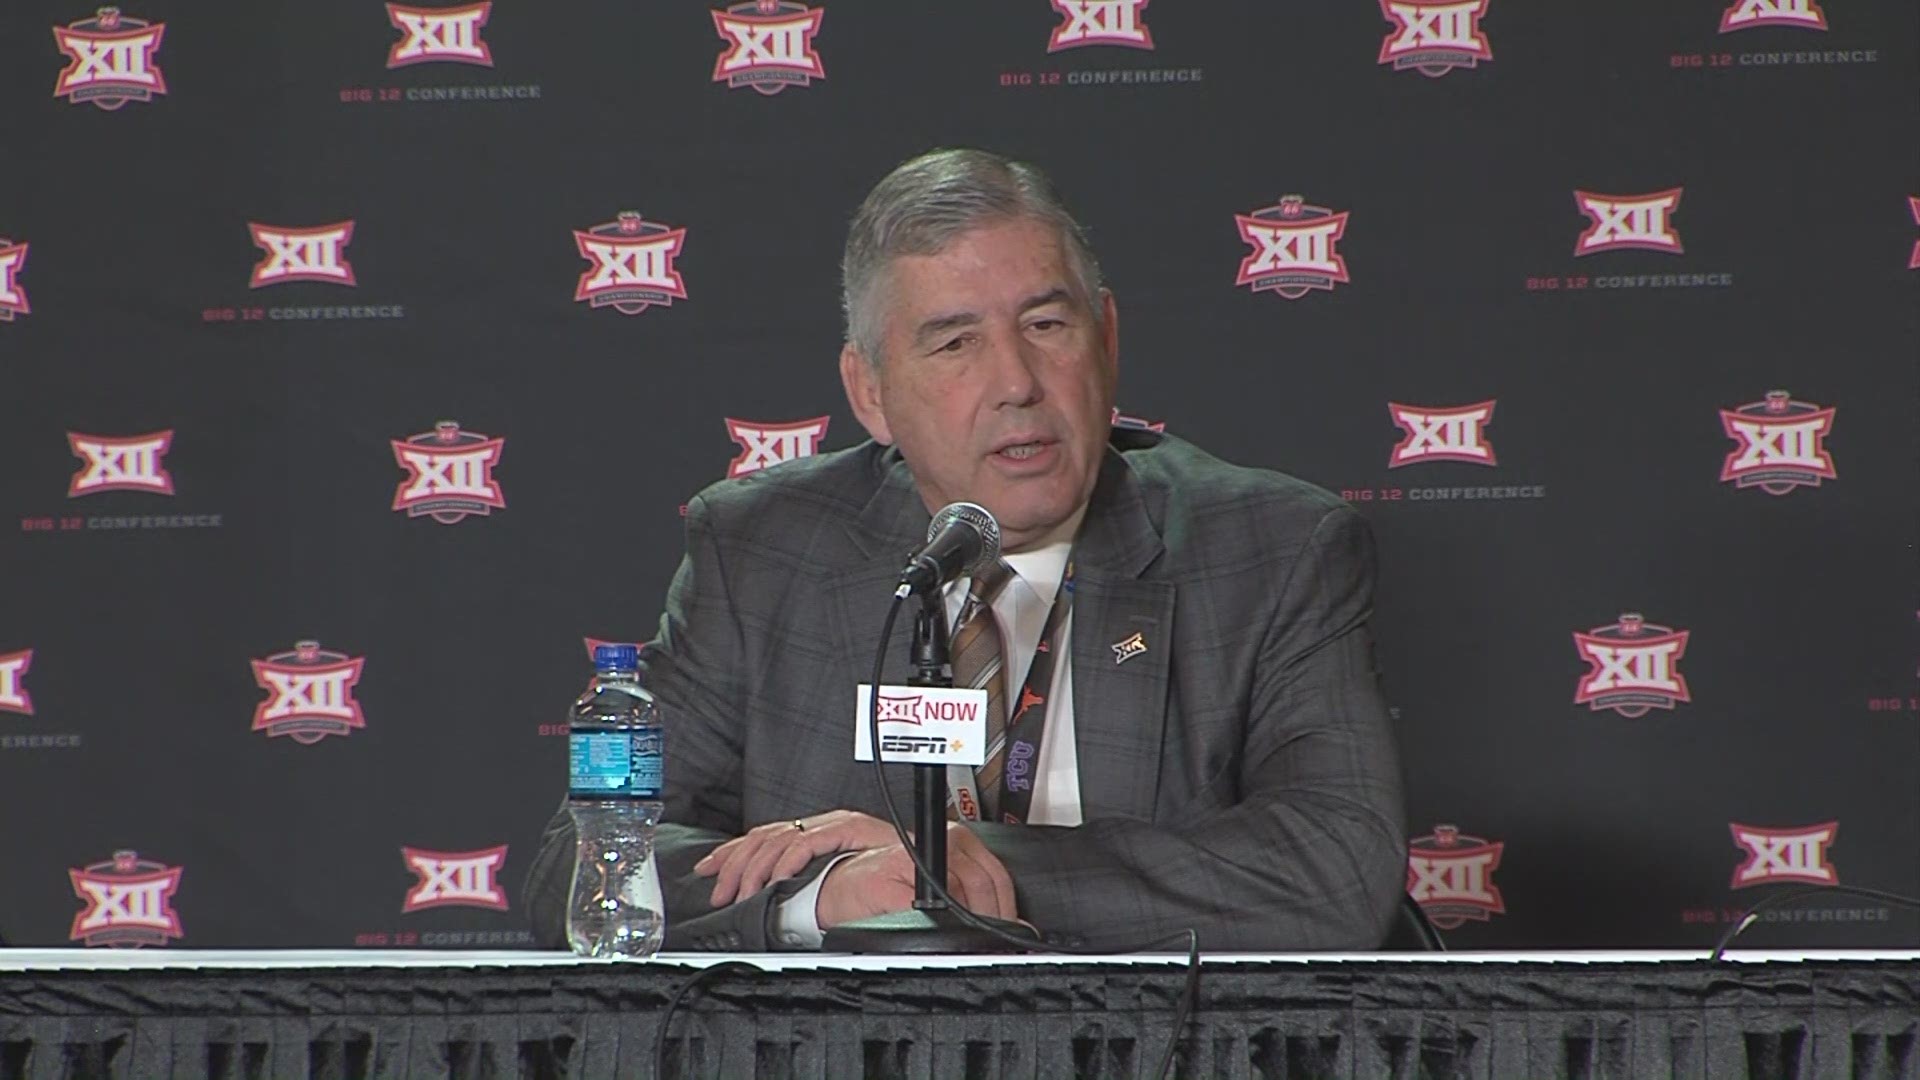 Big 12 Commissioner Bob Bowlsby made the announcement Thursday morning.